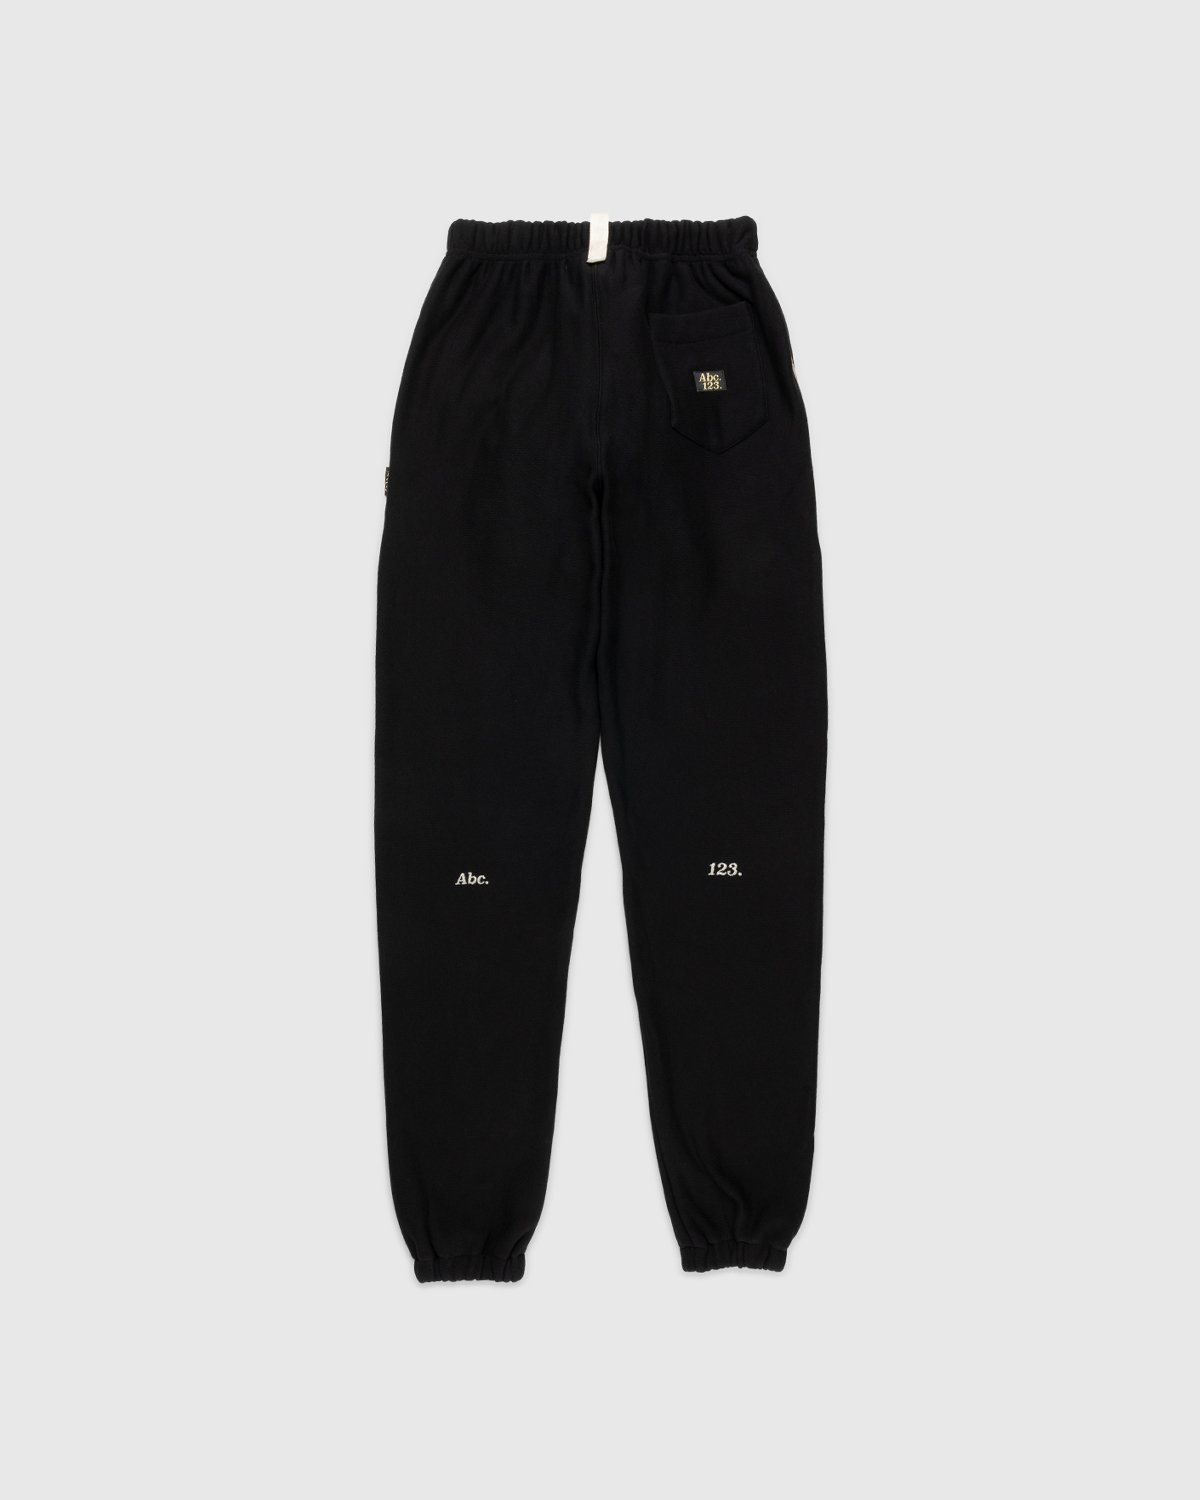 Abc. - French Terry Sweatpants Anthracite - Clothing - Black - Image 2